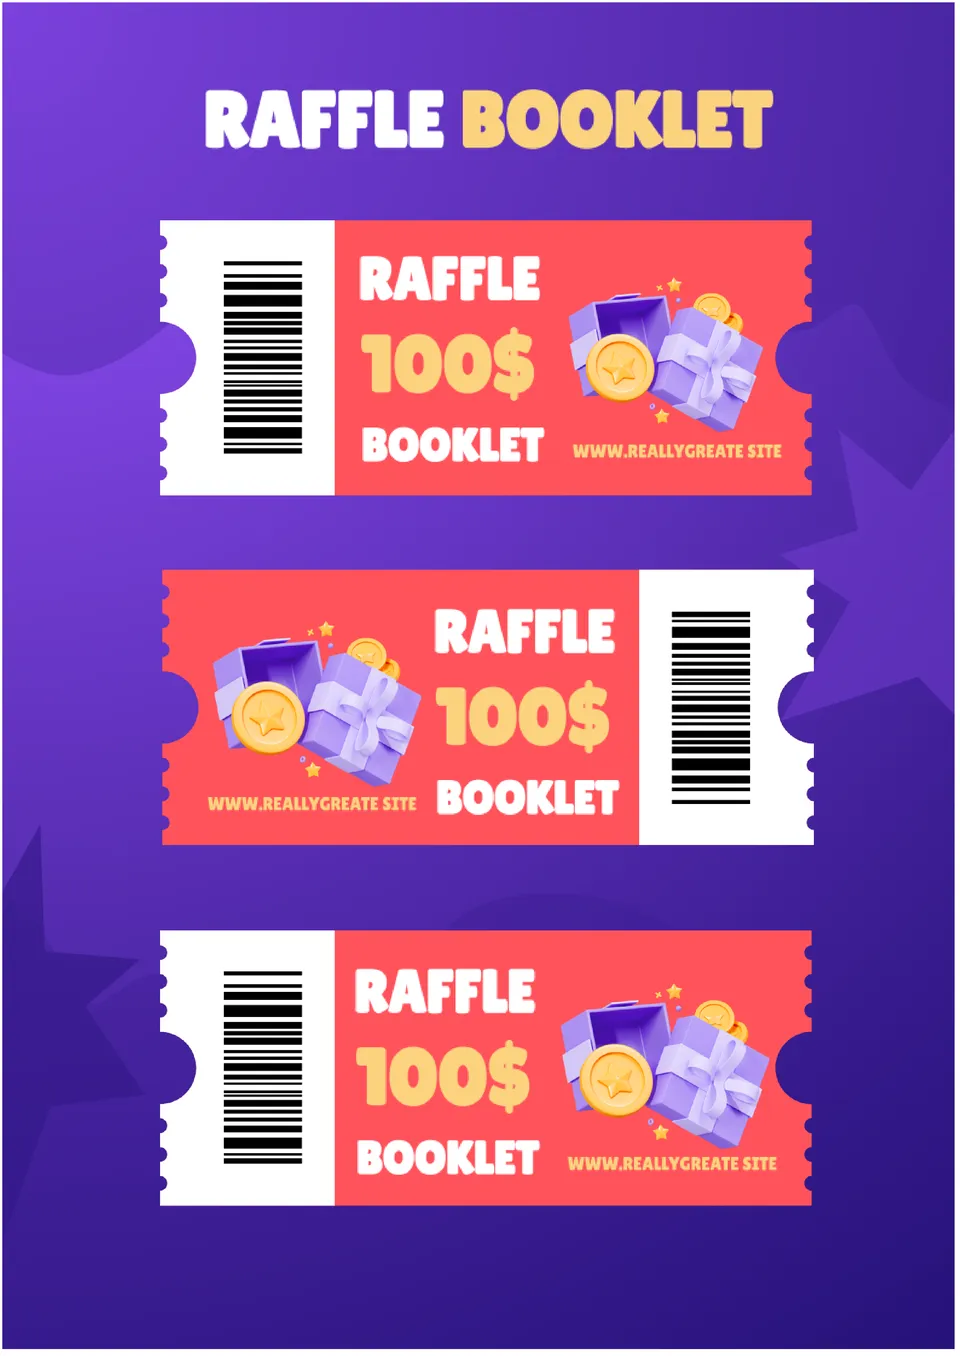 Raffle Booklet Template